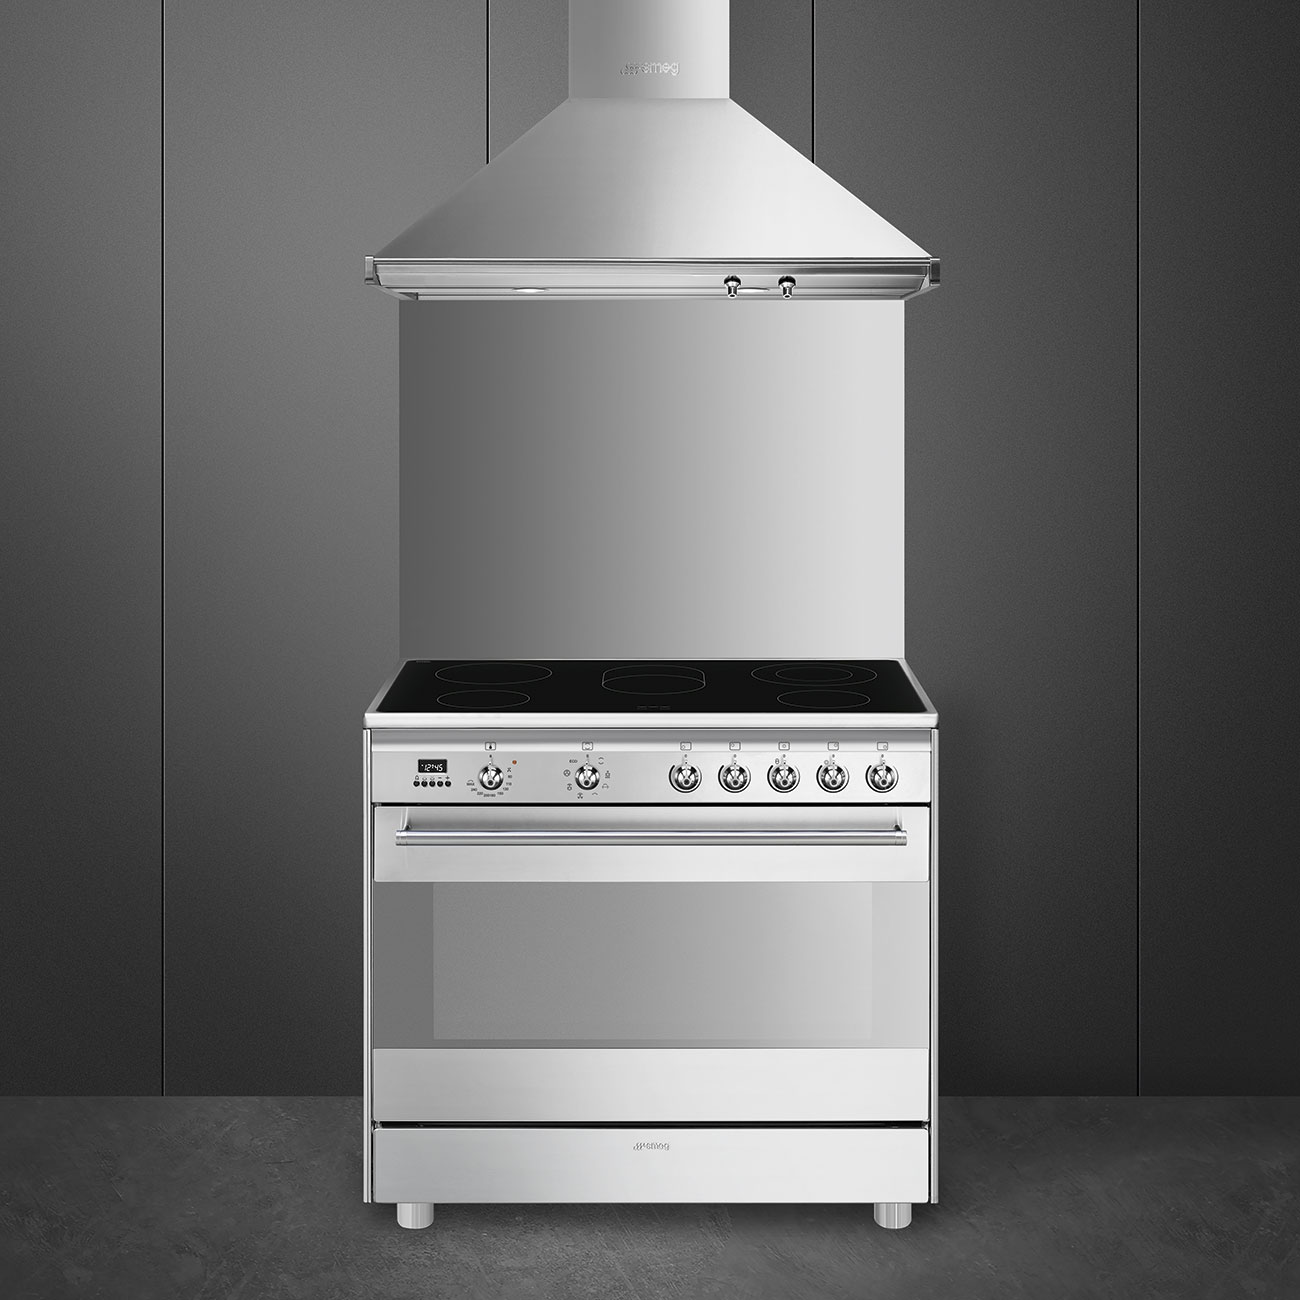 Smeg Stainless steel Cooker with Ceramic Hob_2